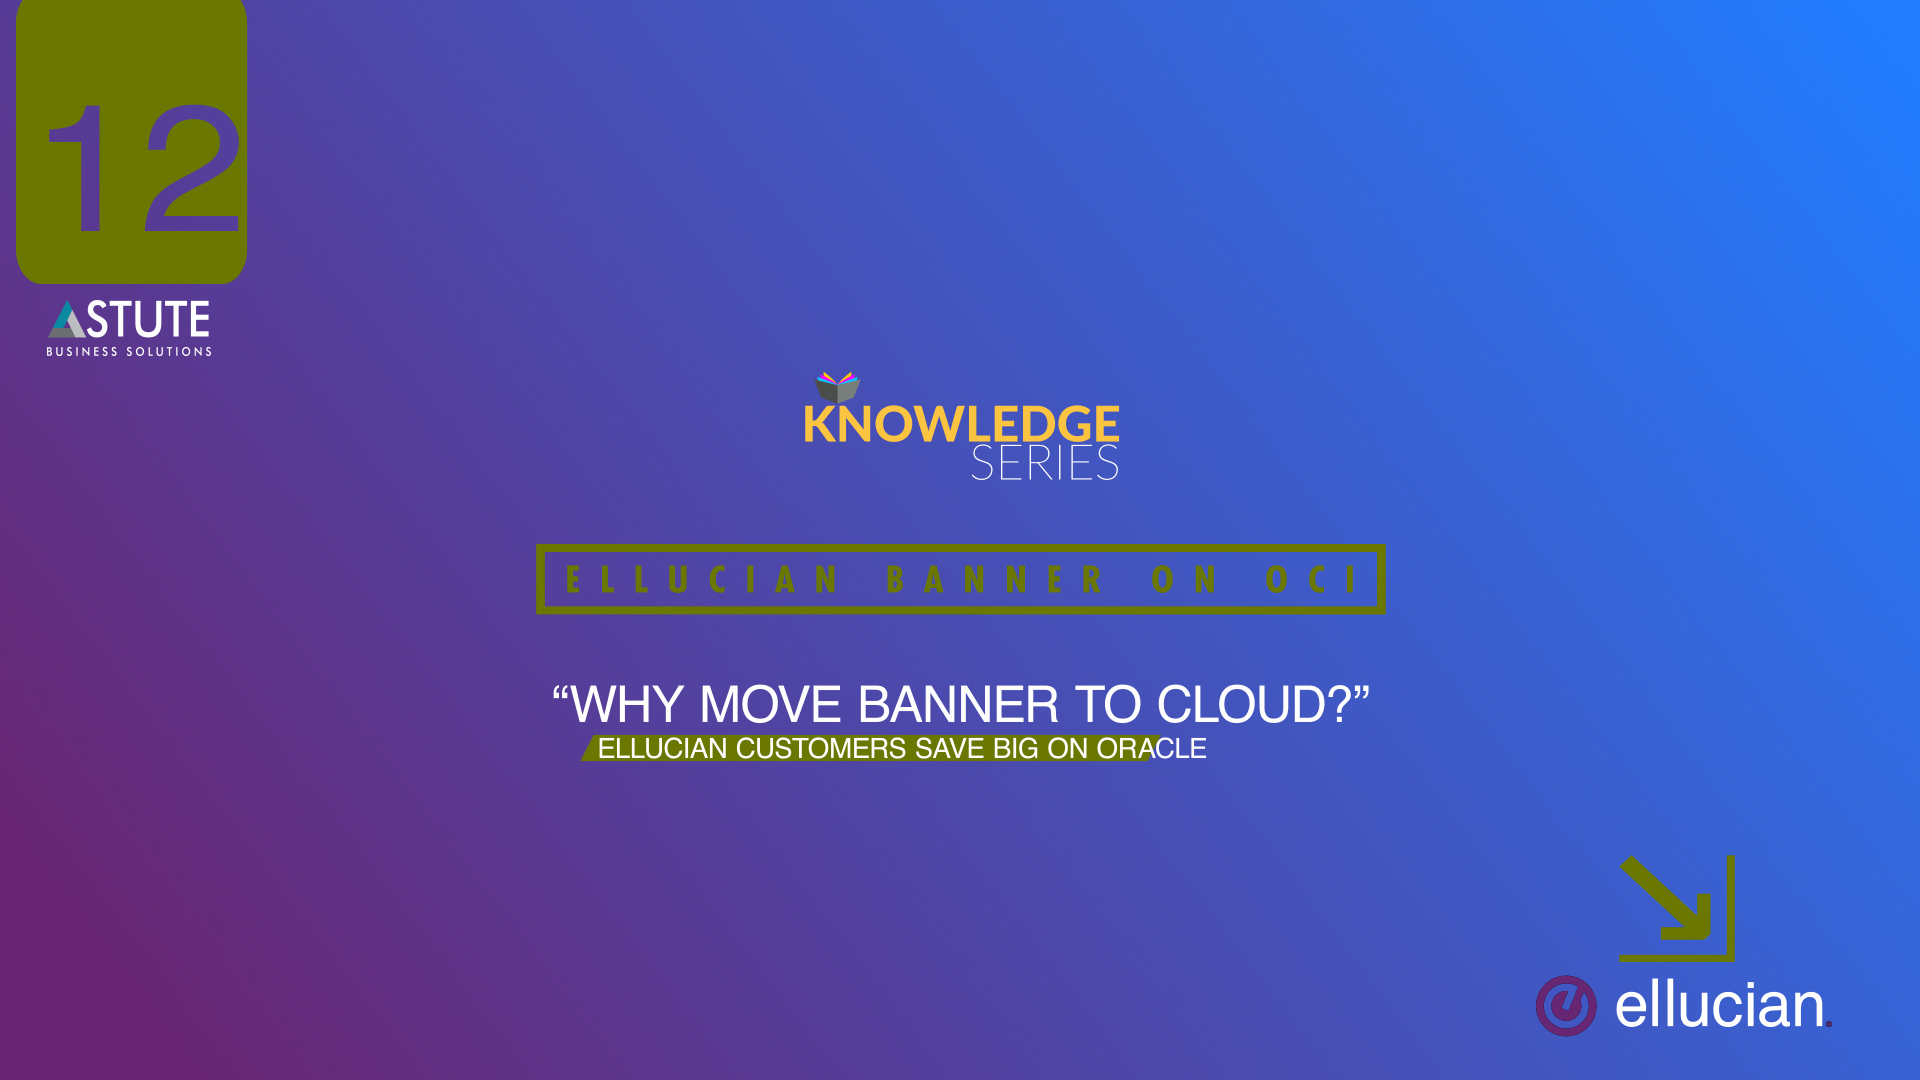 #12 Ellucian _Why Move Banner To Cloud_- Ellucian Customers Save Big On Oracle Cloud